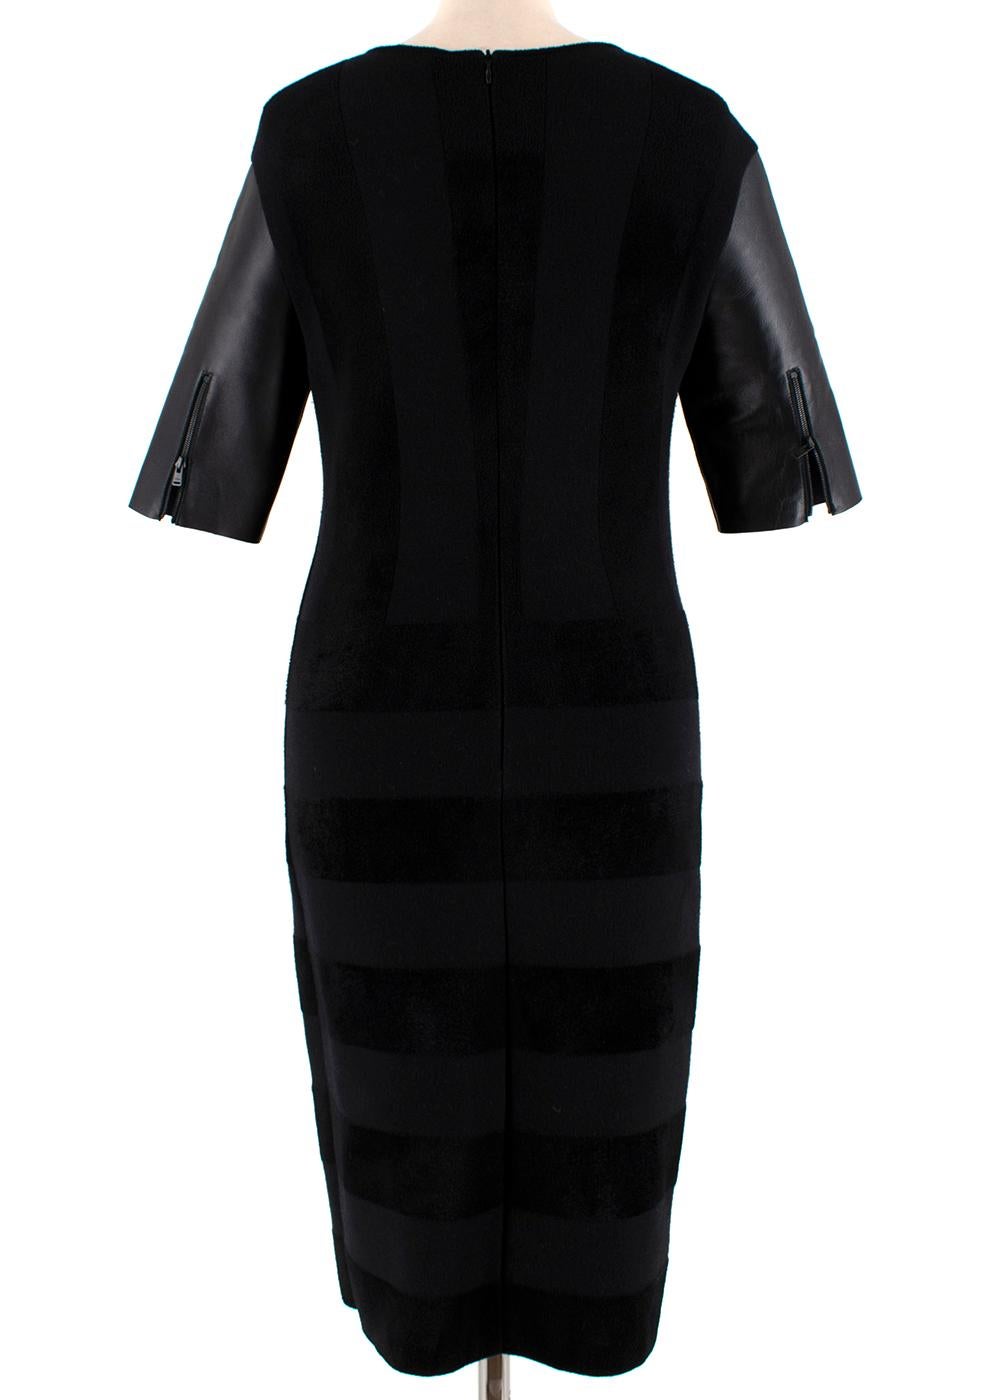 Fendi Black Wool Blend Striped Dress with Leather Sleeves - Size US 4 In New Condition For Sale In London, GB